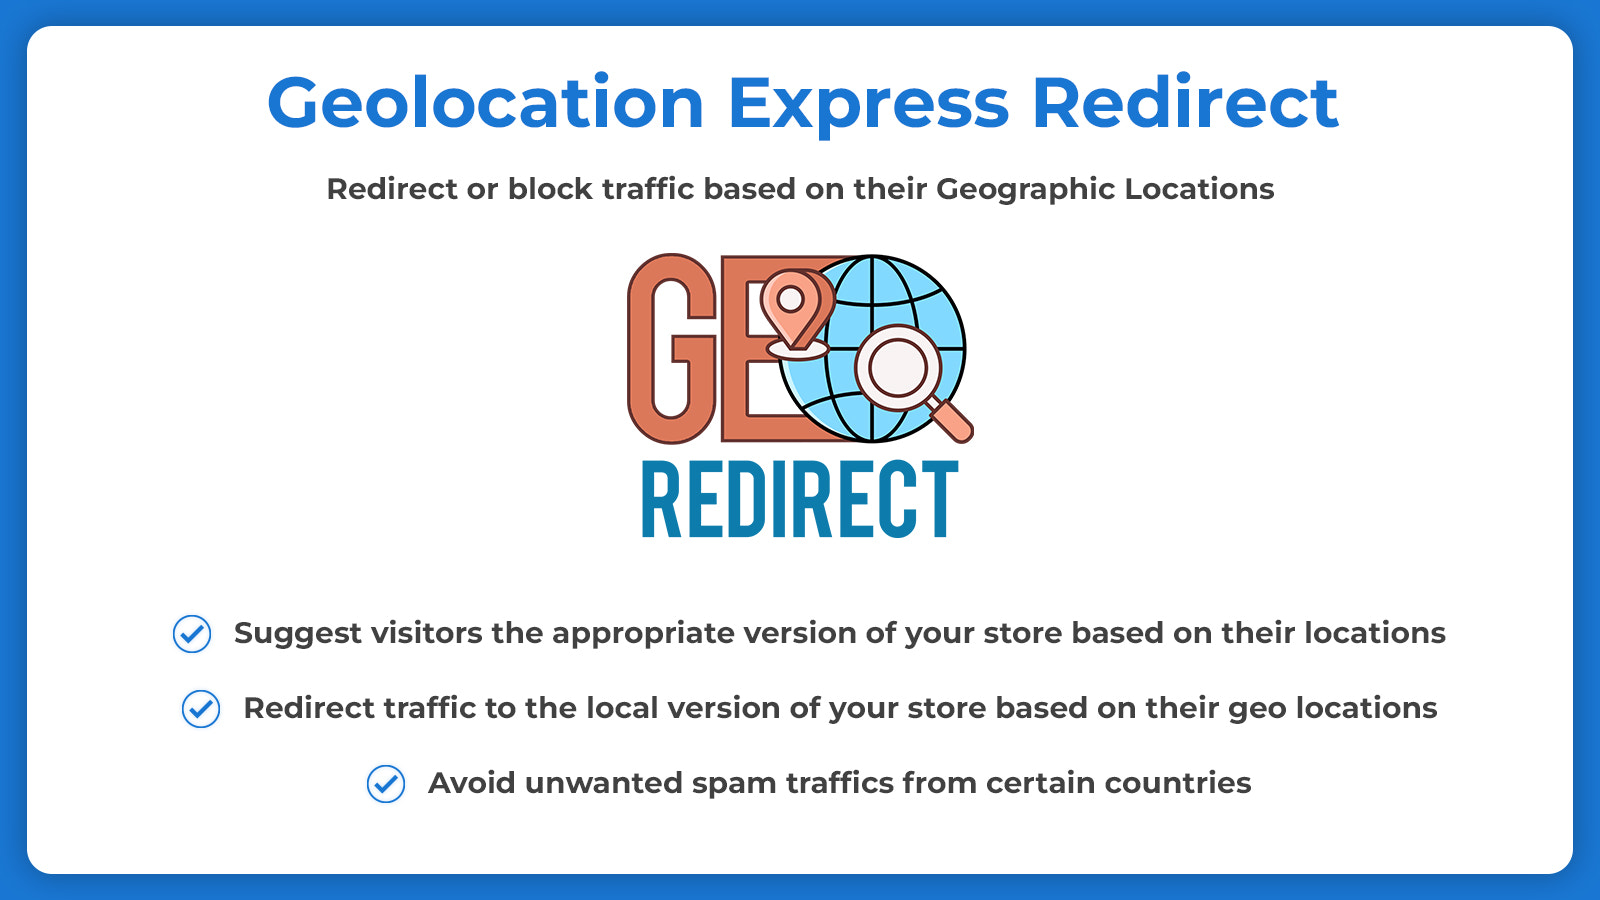 Redirect or block traffic based on Geolocation or Geolocation